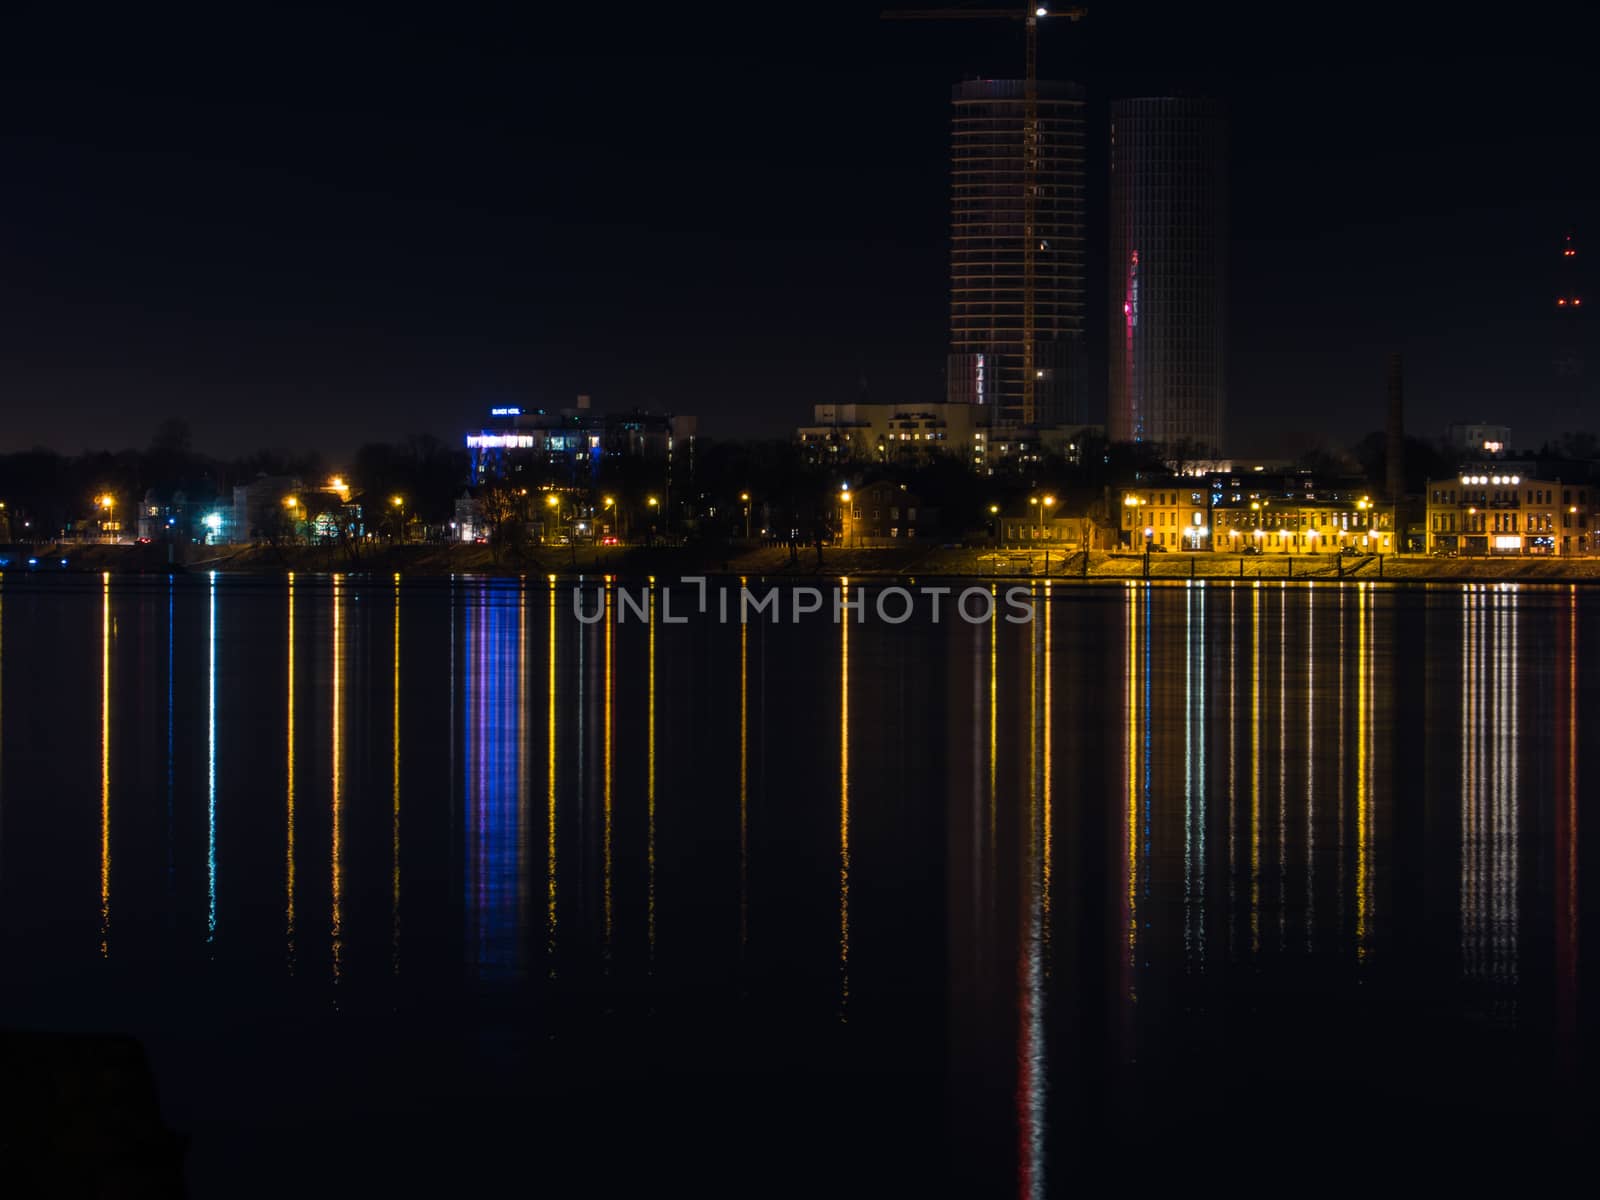 The view from Daugava river in evening